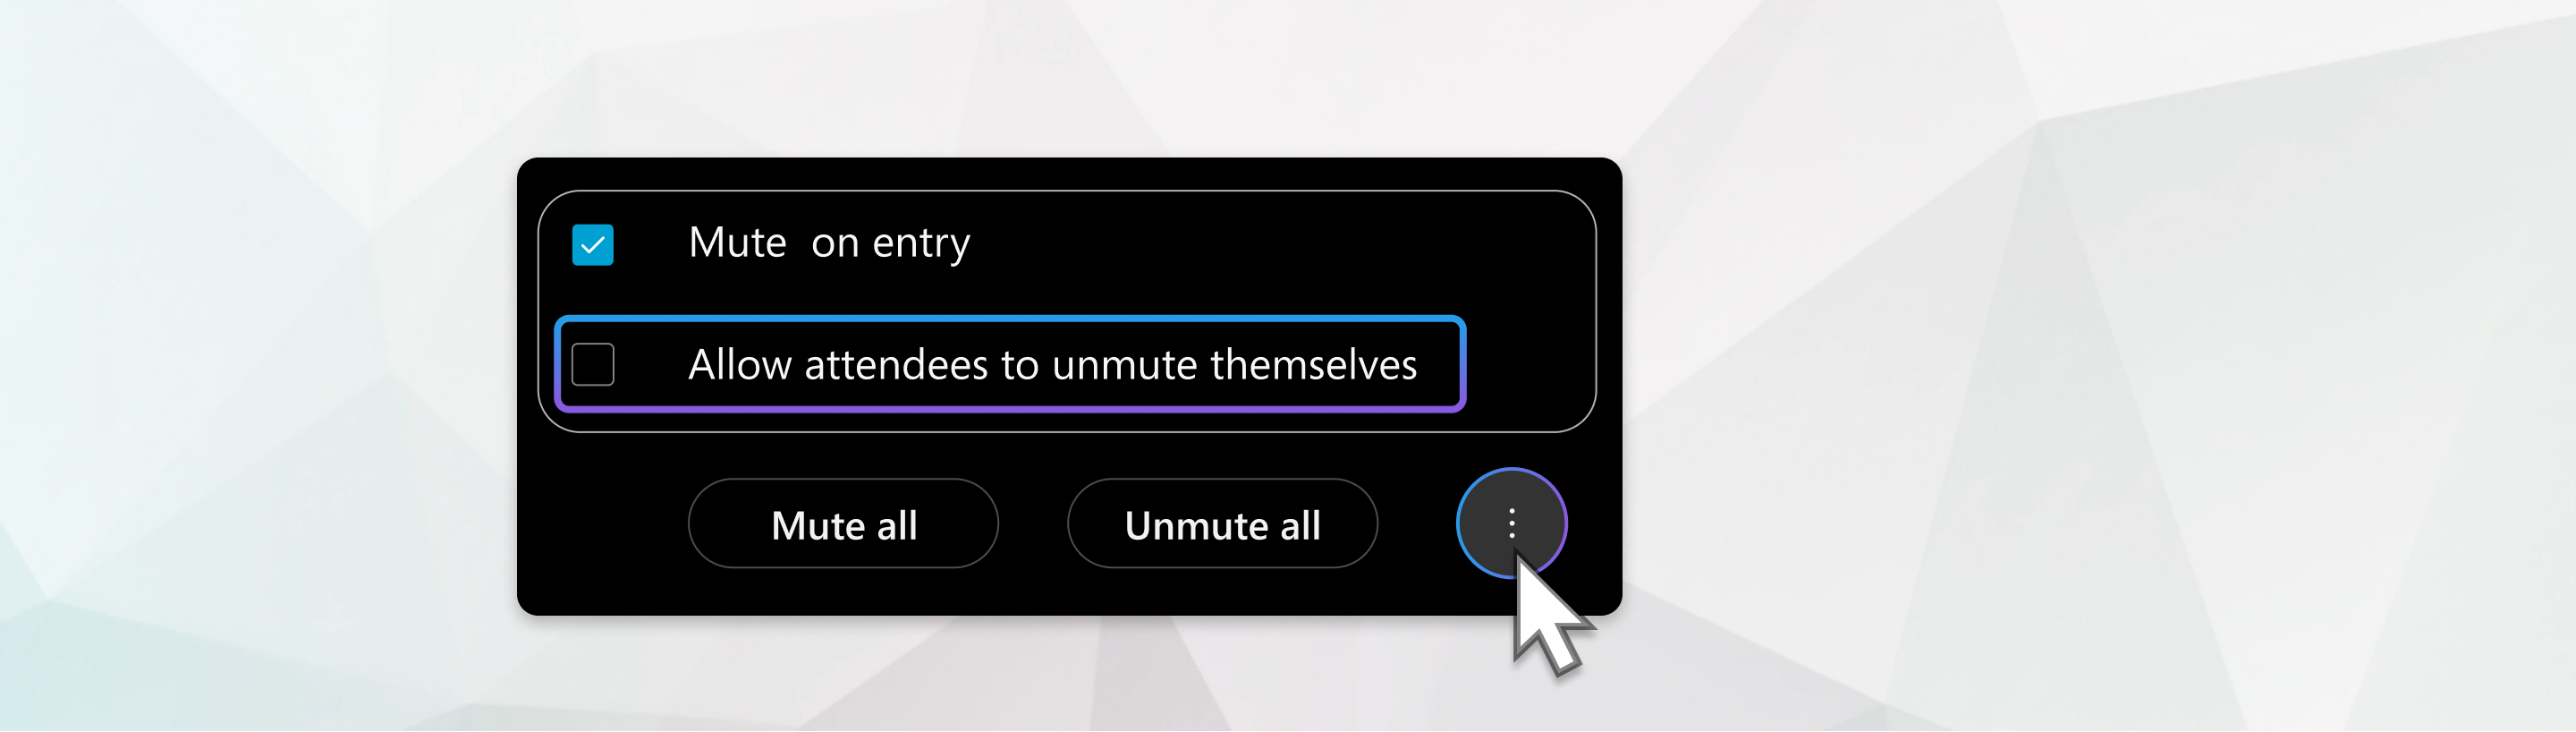 Allow attendees to unmute themselves menu option